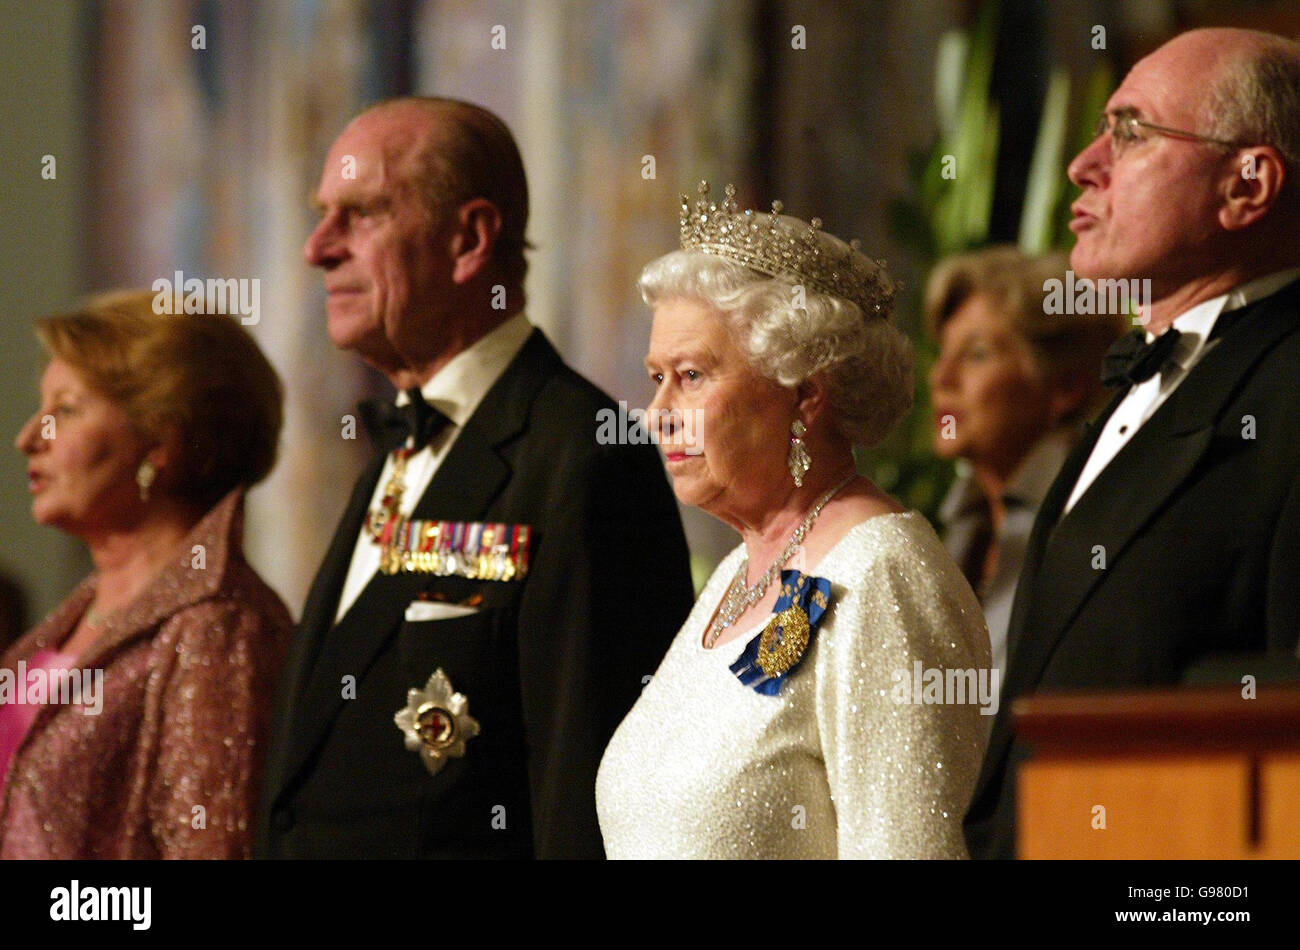 Queen Elizabeth II, the Duke of Edinburgh, Australian Prime Minister John Howard (right) and wife Marlena Howard (left) stand during an official dinner in Parliament House, Canberra, Australia, Tuesday March 14, 2006. The Queen is conducting a five-day tour of the country. See PA story ROYAL Queen. PRESS ASSOCIATION photo. Photo credit should read: Gareth Fuller/PA. Stock Photo